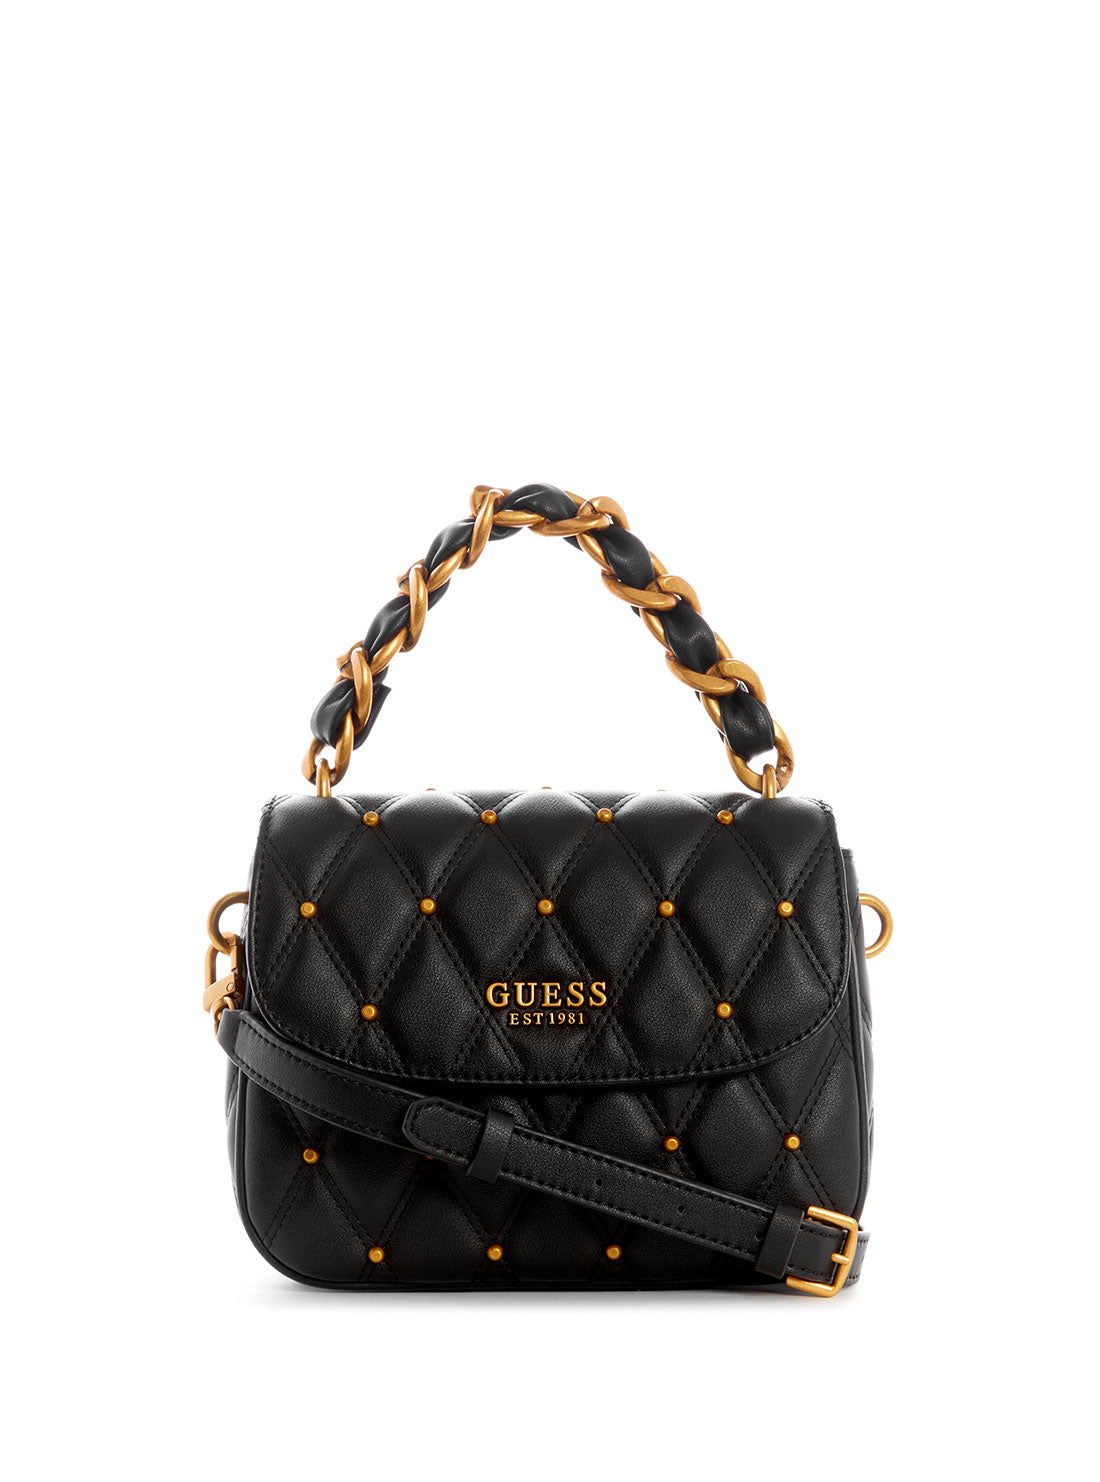 GUESS Womens Black Triana Studded Shoulder Bag QS855319 Front View